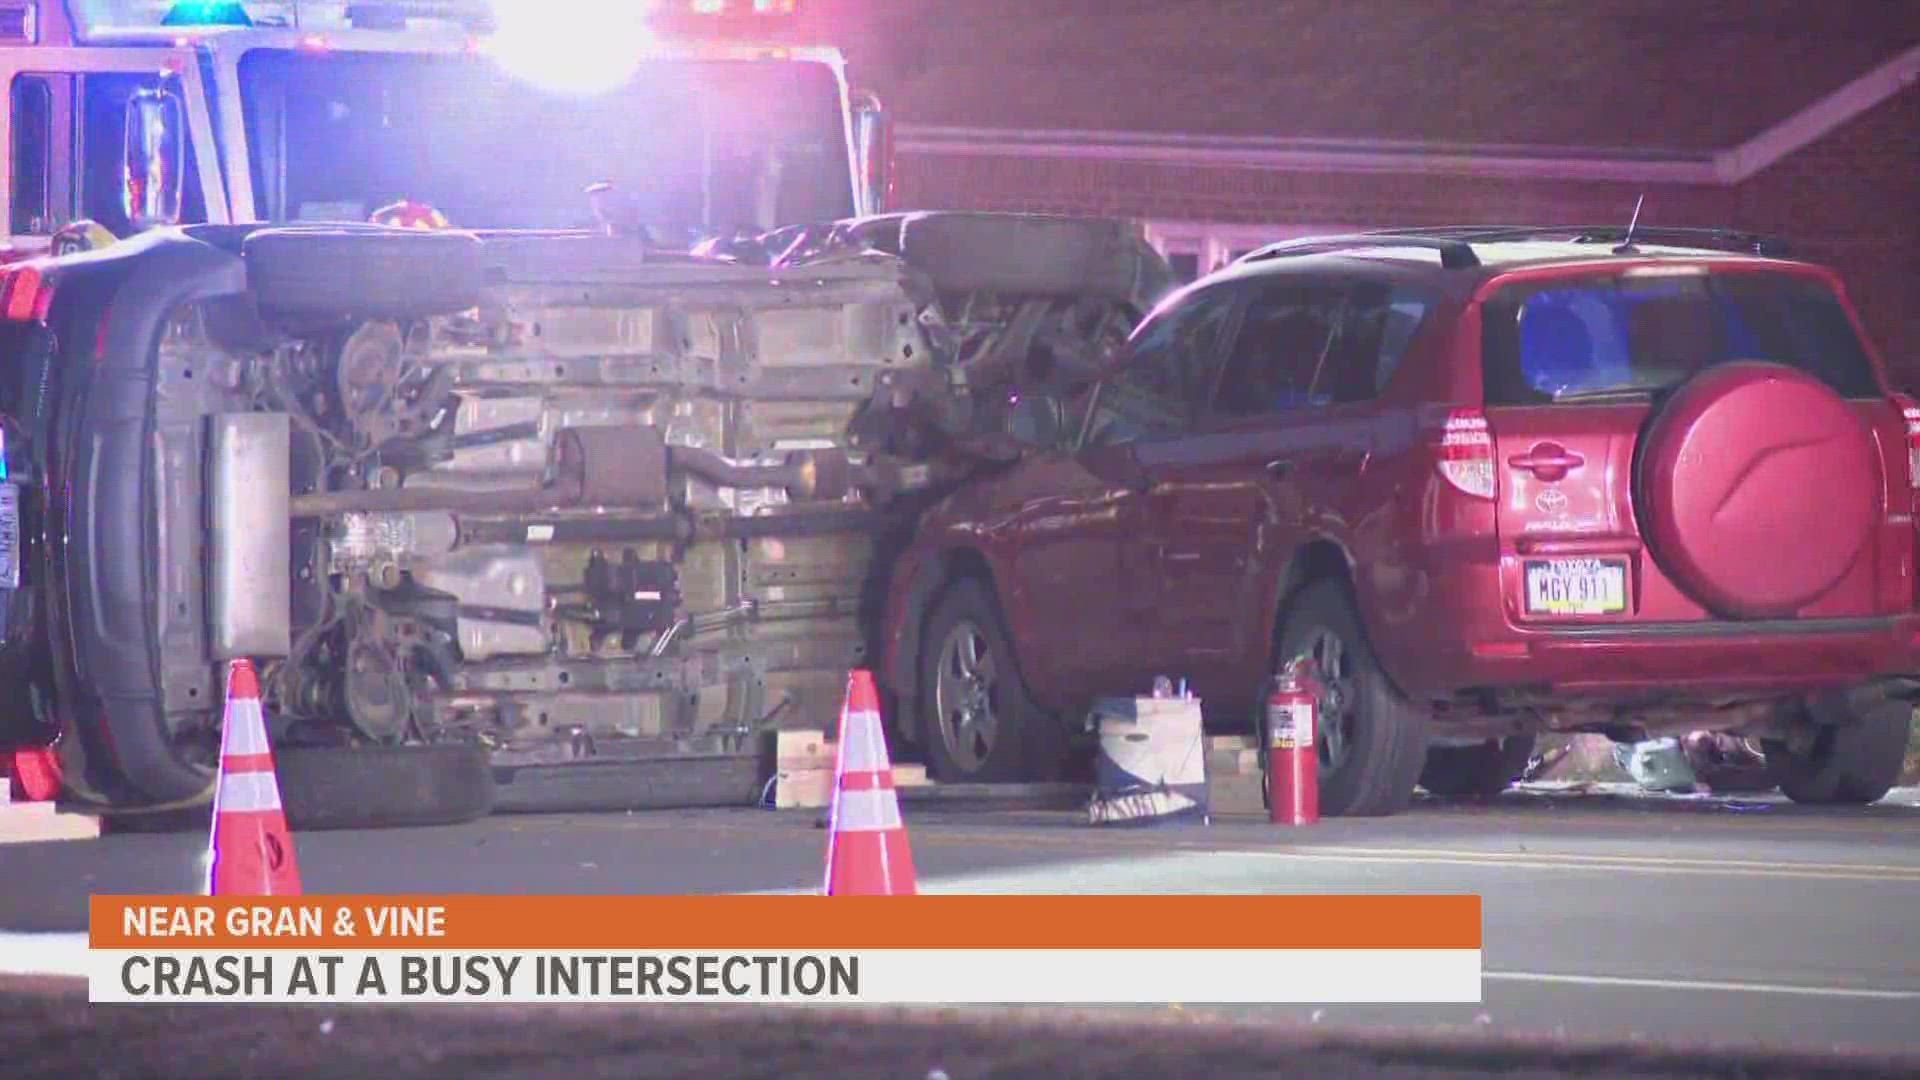 Police say both drivers were transported to area hospitals with non-life-threatening injuries.